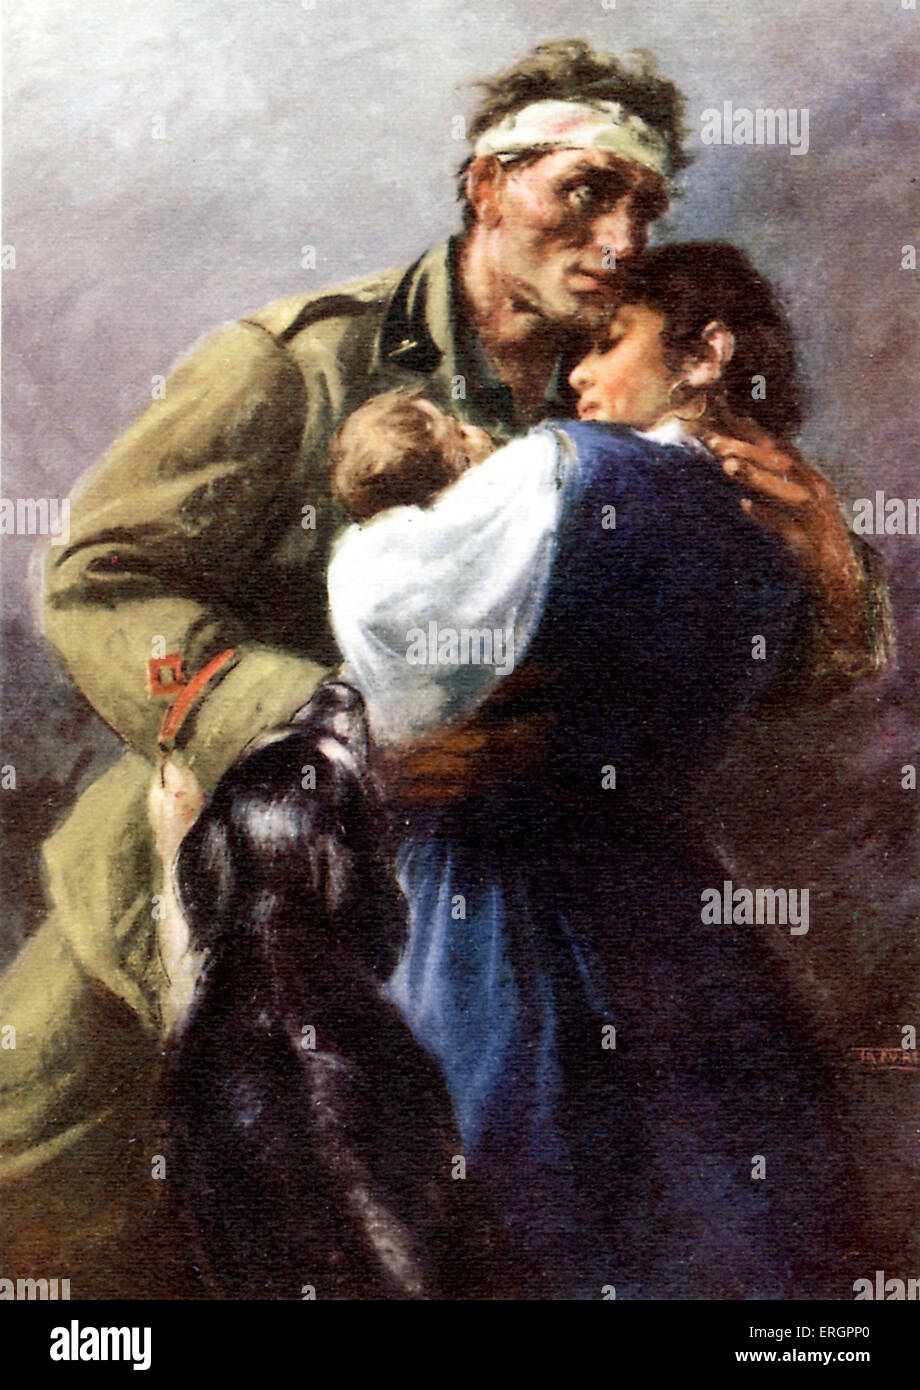 Italian propaganda postcard. A bandaged soldier embraces his wife, child and dog. Caption reads: 'The Italian people have Stock Photo